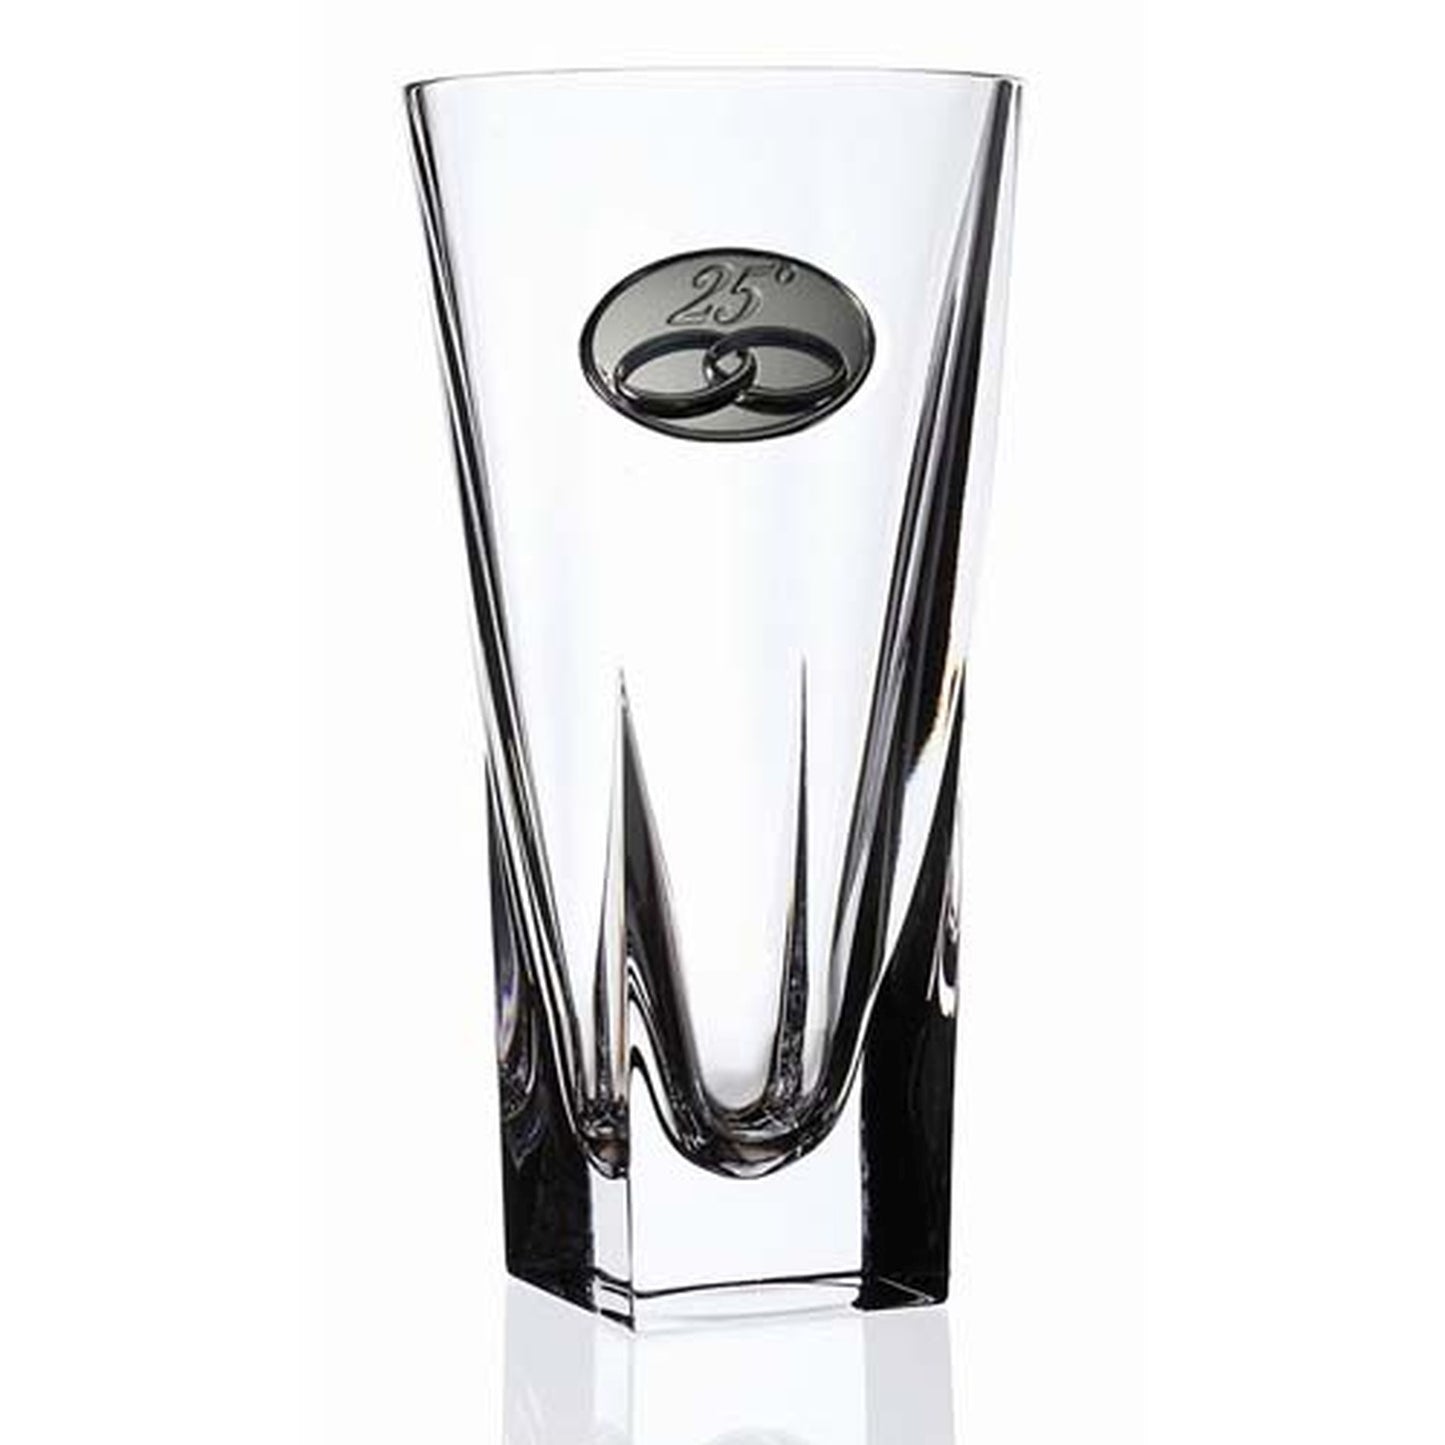 Rcr Fusion Crystal Vase Small With 25Th Anniversary, Crystal